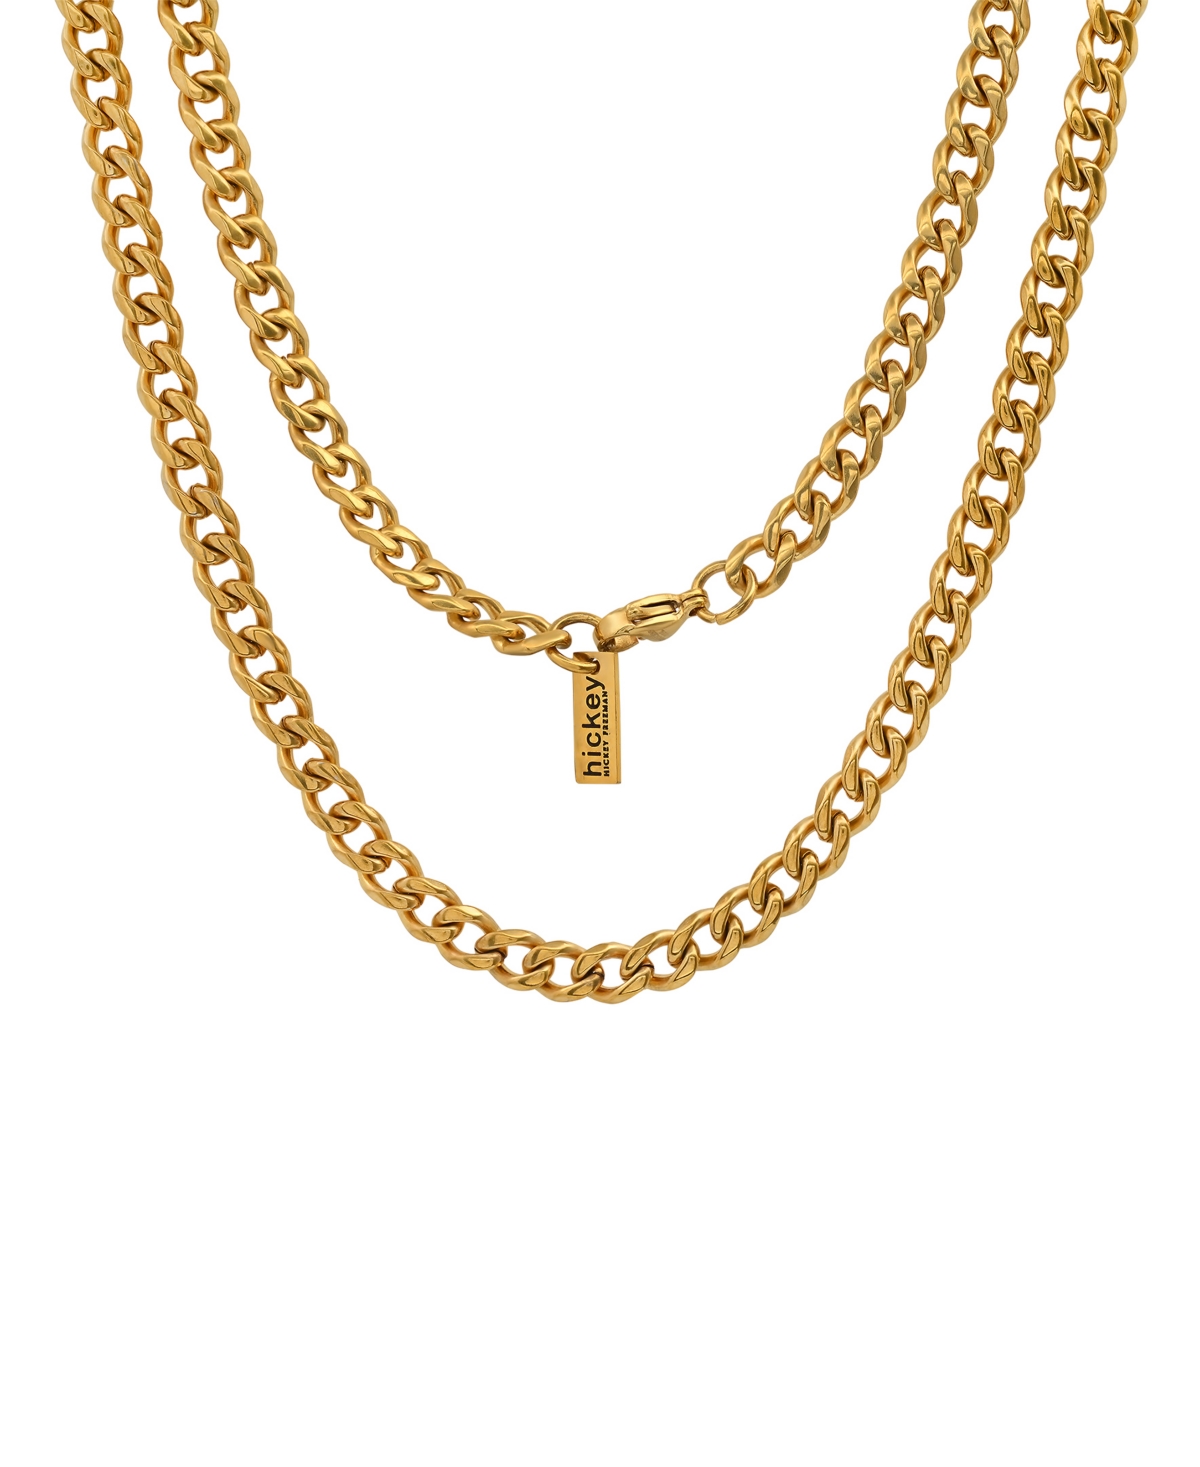 Hmy Jewelry 18k Gold Plated Cuban Link Chain Necklace